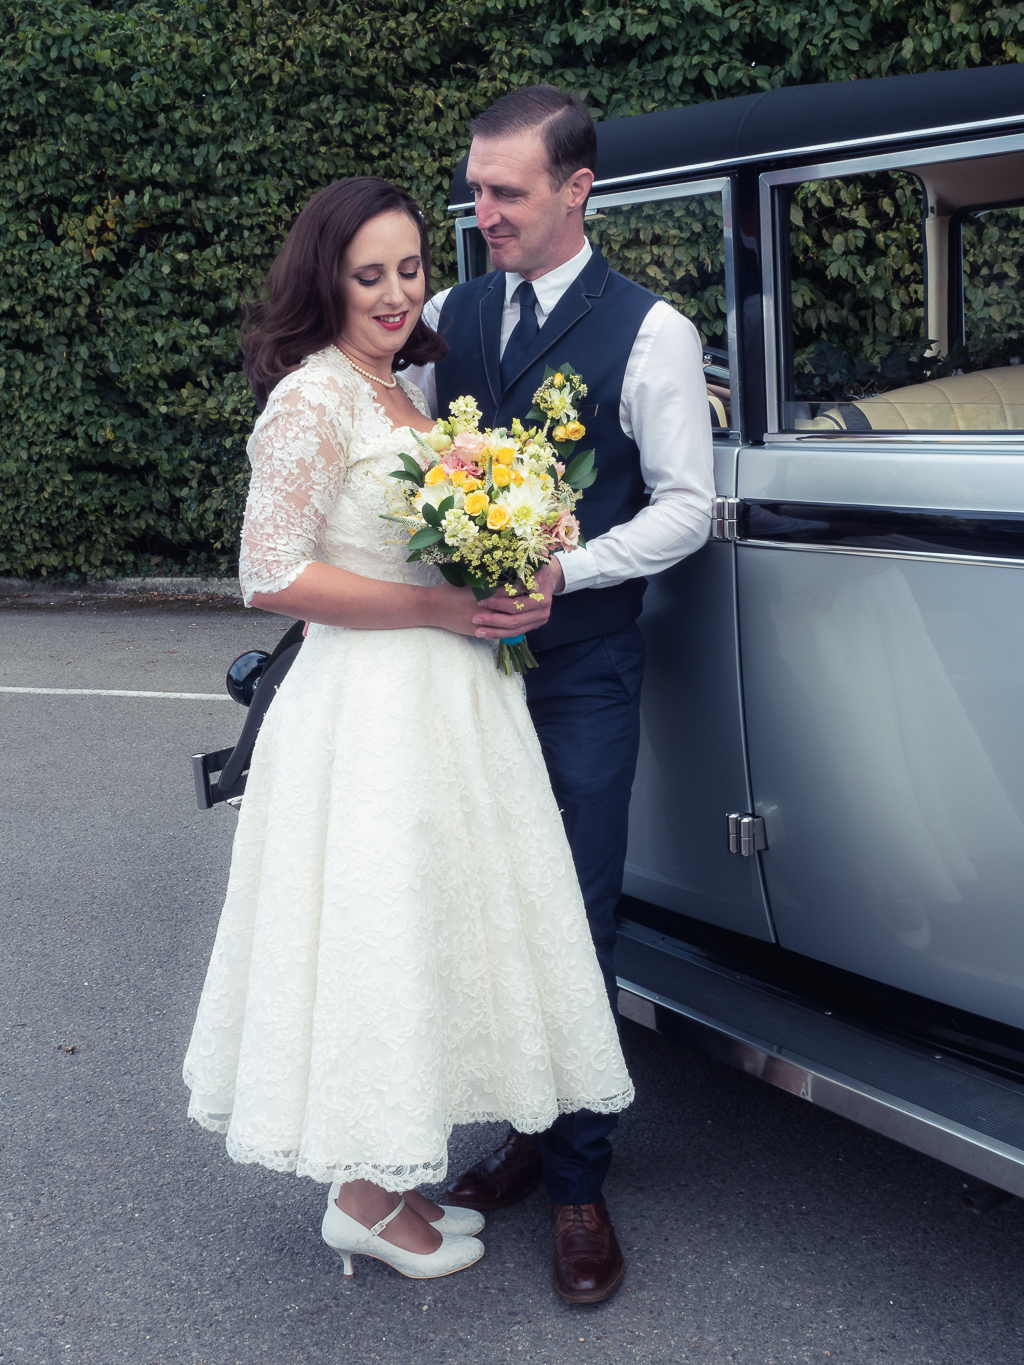 Traditional vintage styled wedding photoshoot at The Orangery Suite, photographer credit Dom Brenton Photography (47)